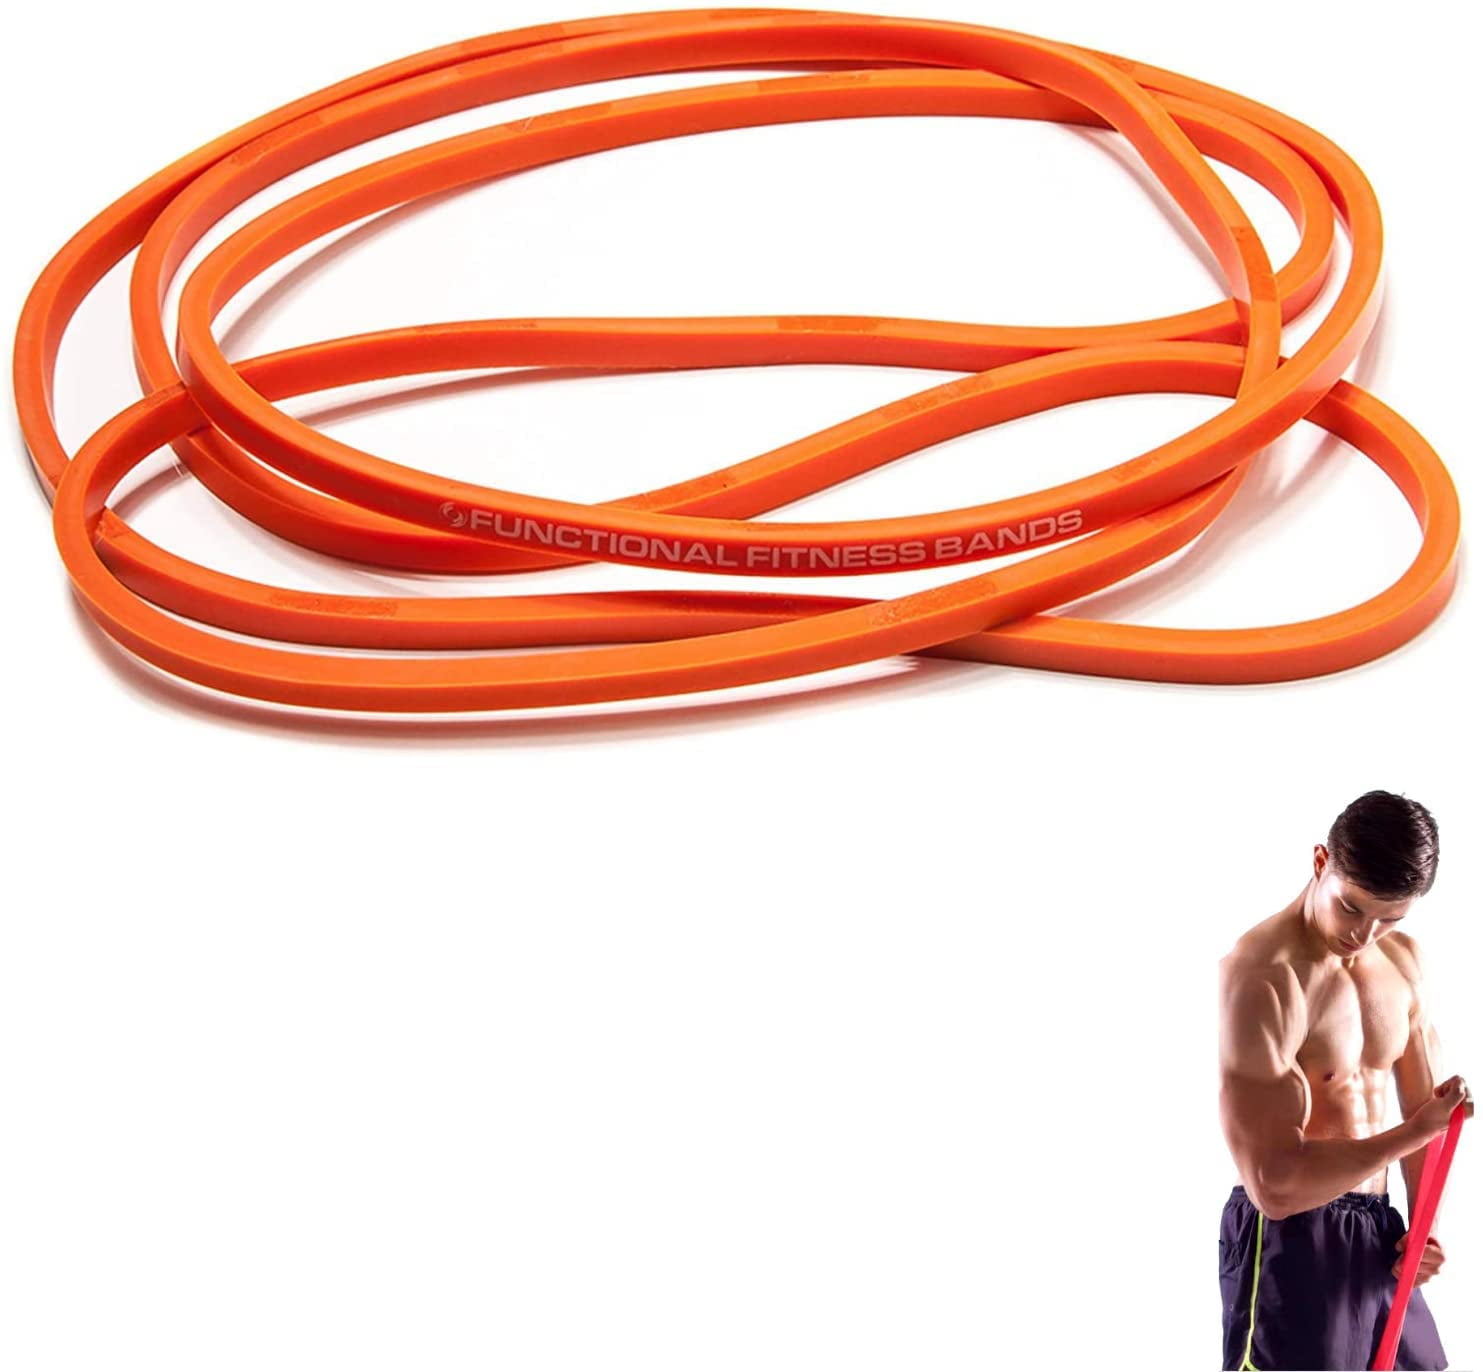 Mobility Rubberbanditz Single Pull Up Assit Bands Heavy Duty Resistance Exercise Bands for Powerlifting and Stretching 